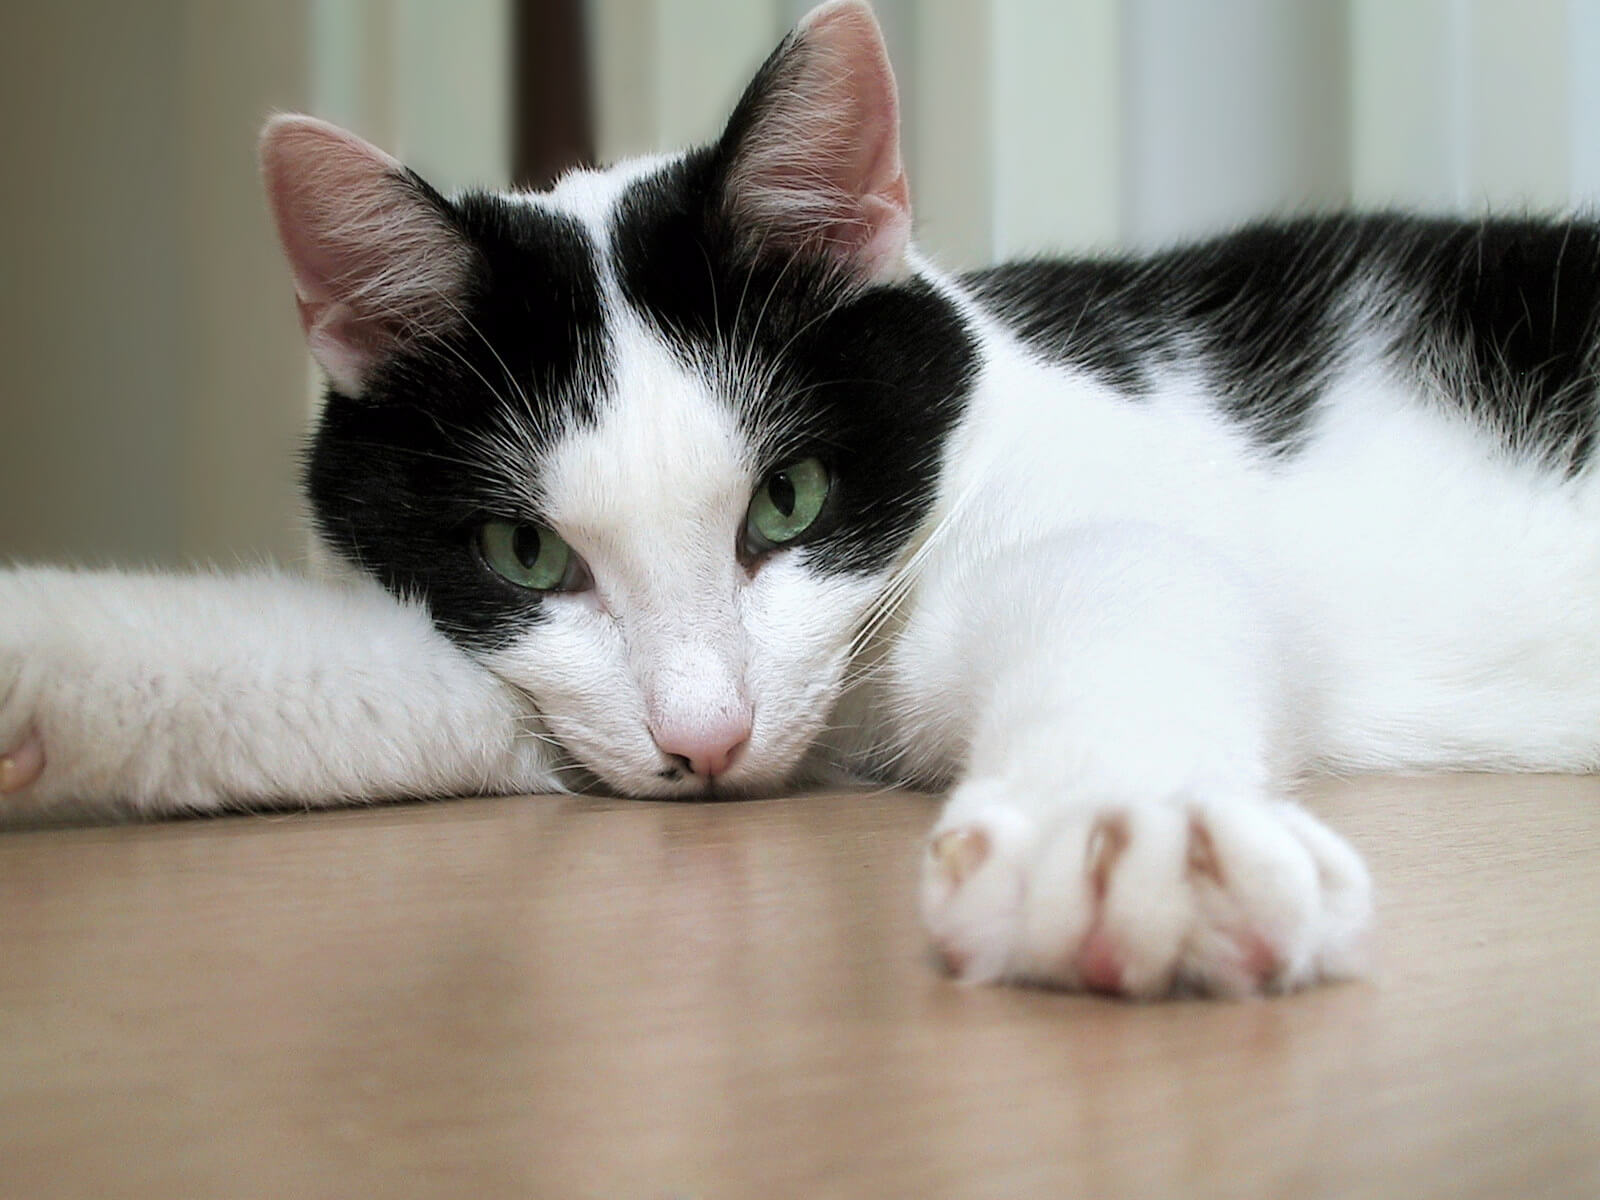 Lazy cat stretches out their paws